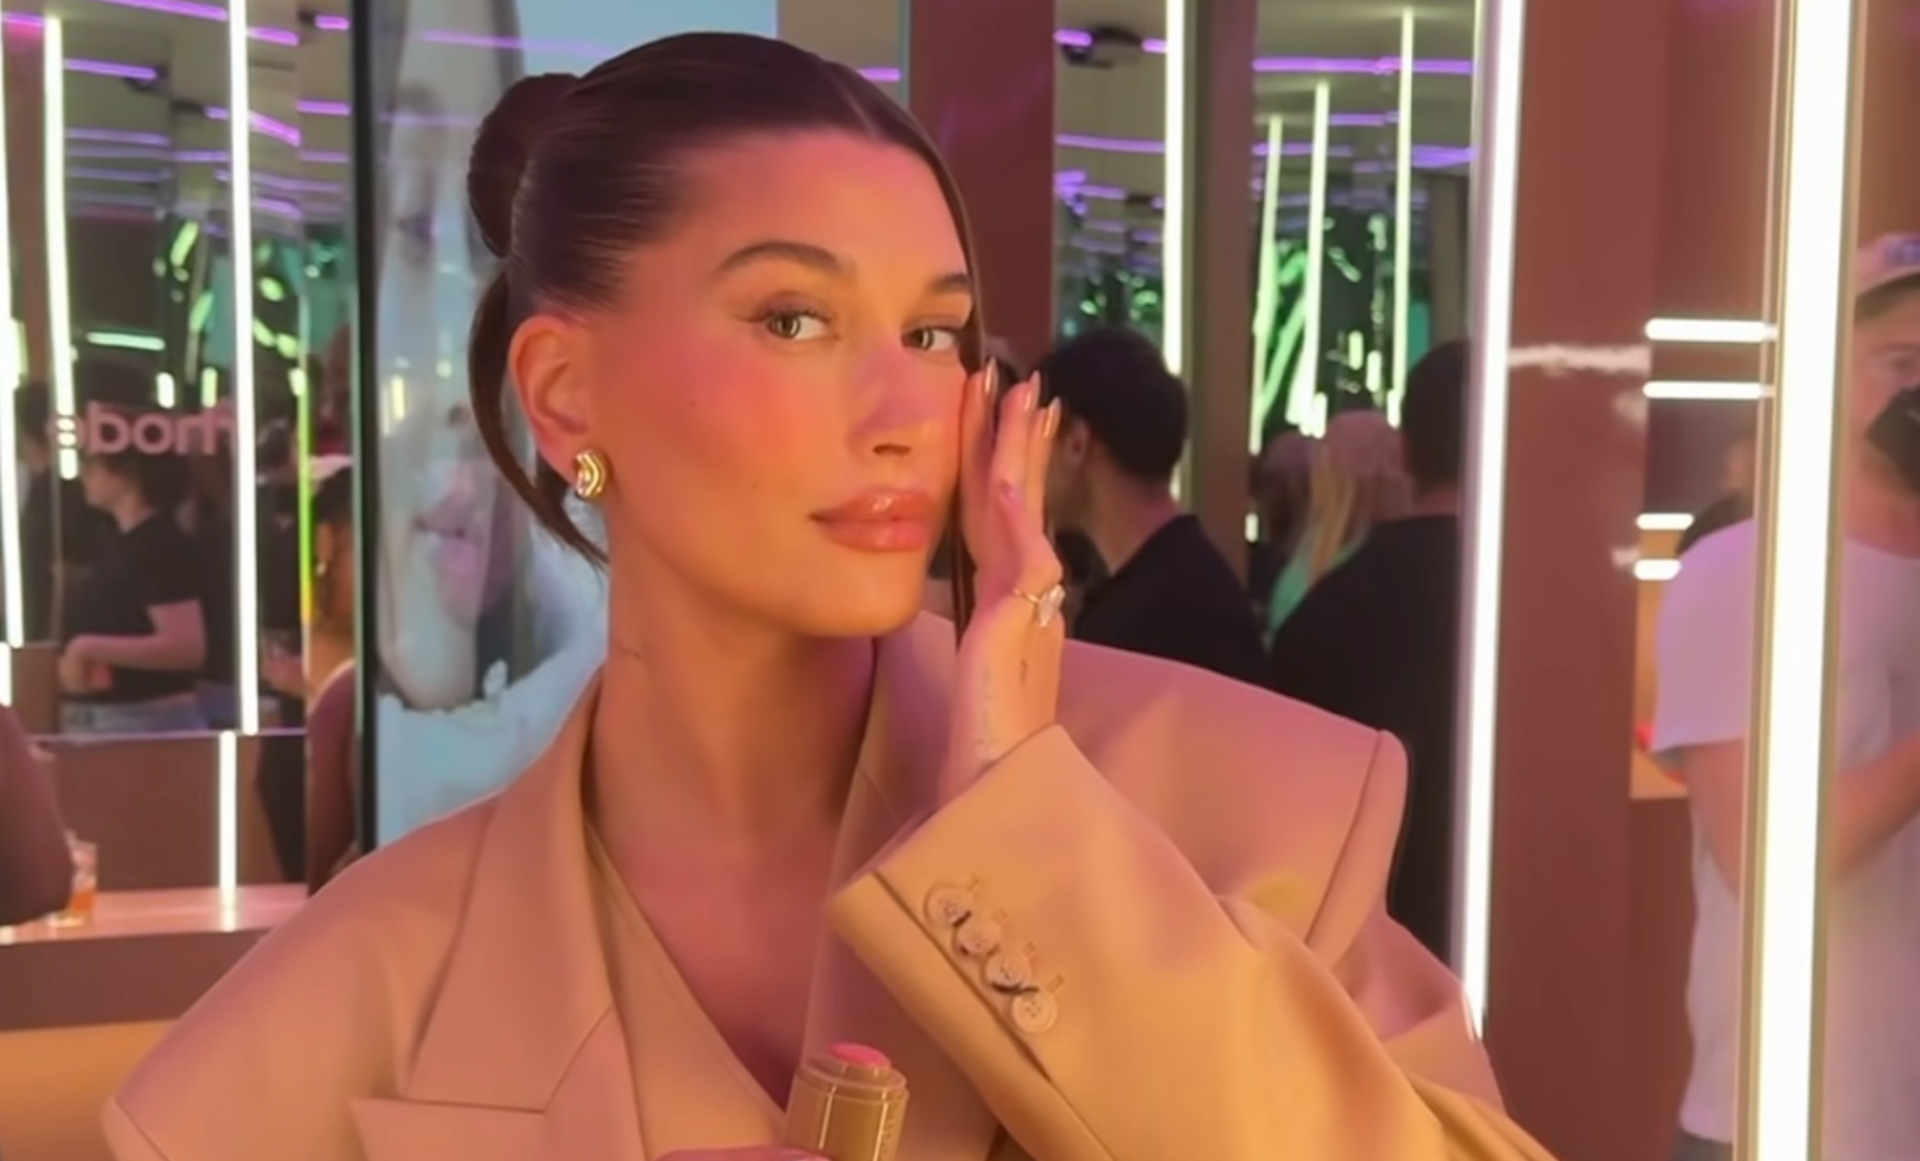 Hailey Bieber's brand, Rhode Skin, just released their Pocket Blushes and Summer Lip Tints. Now, people can test these products at the NYC pocket-sized pop-up.